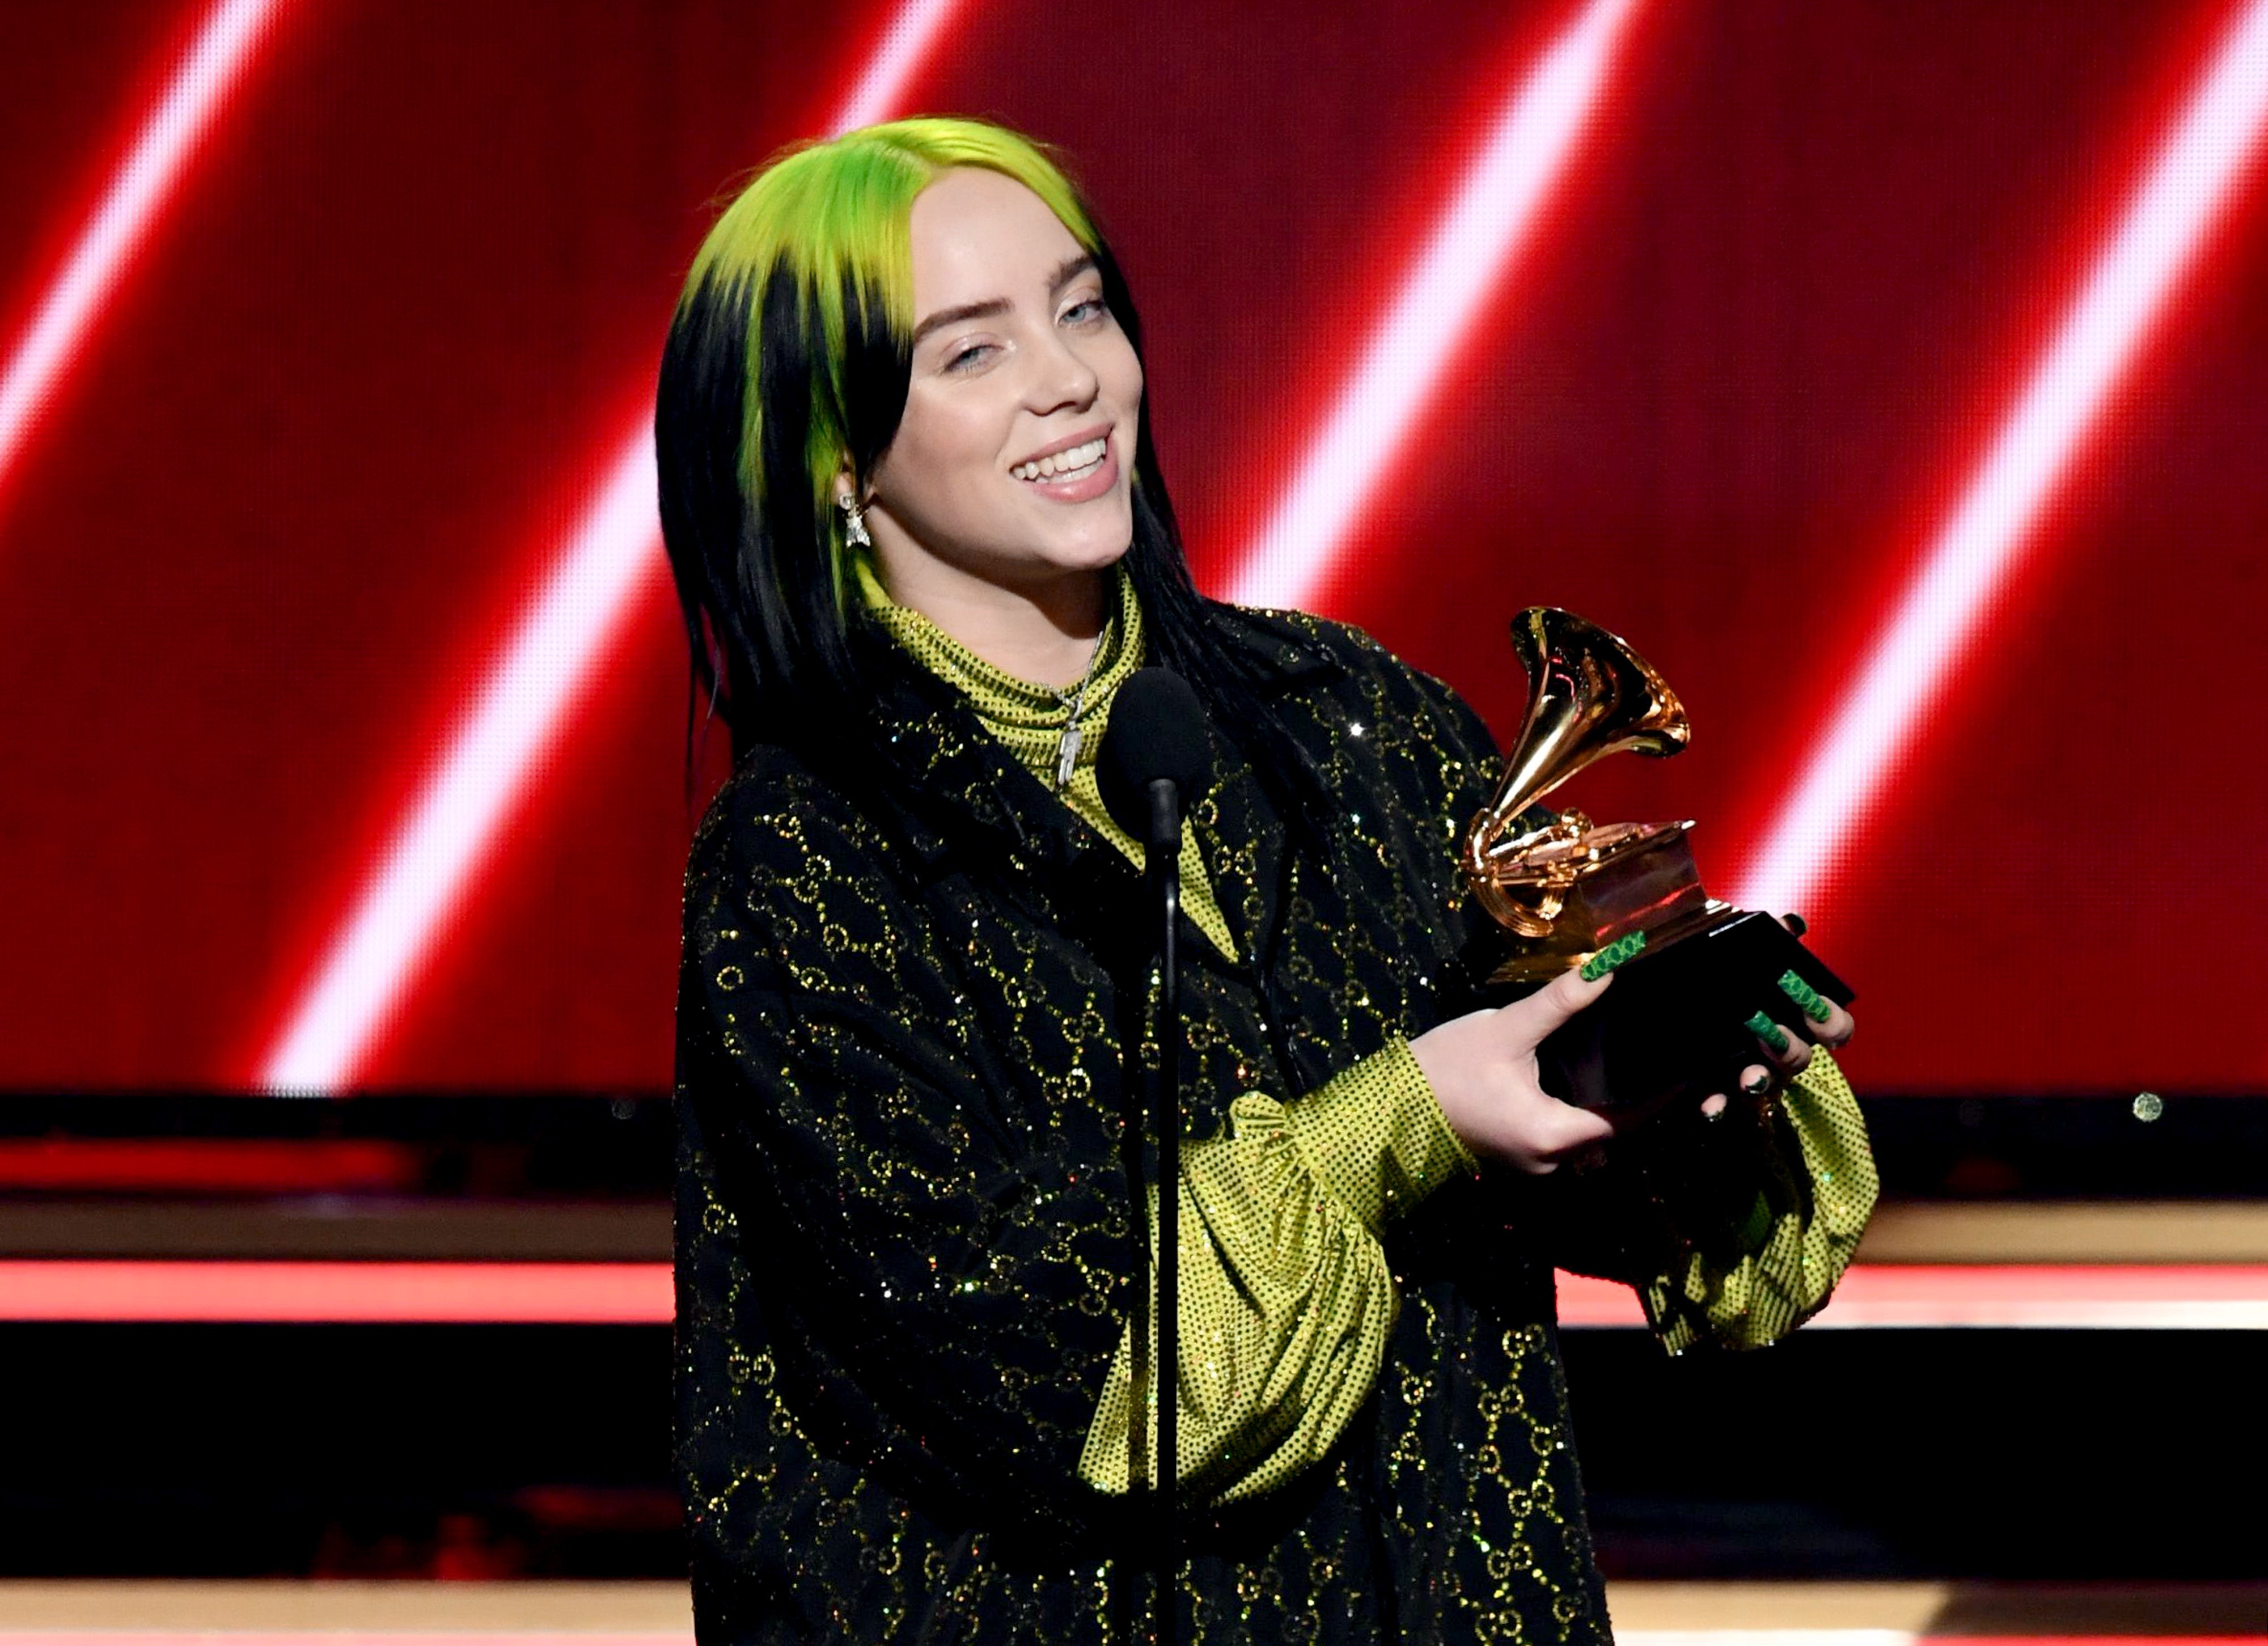 Billie Eilish appears to respond to body-shaming